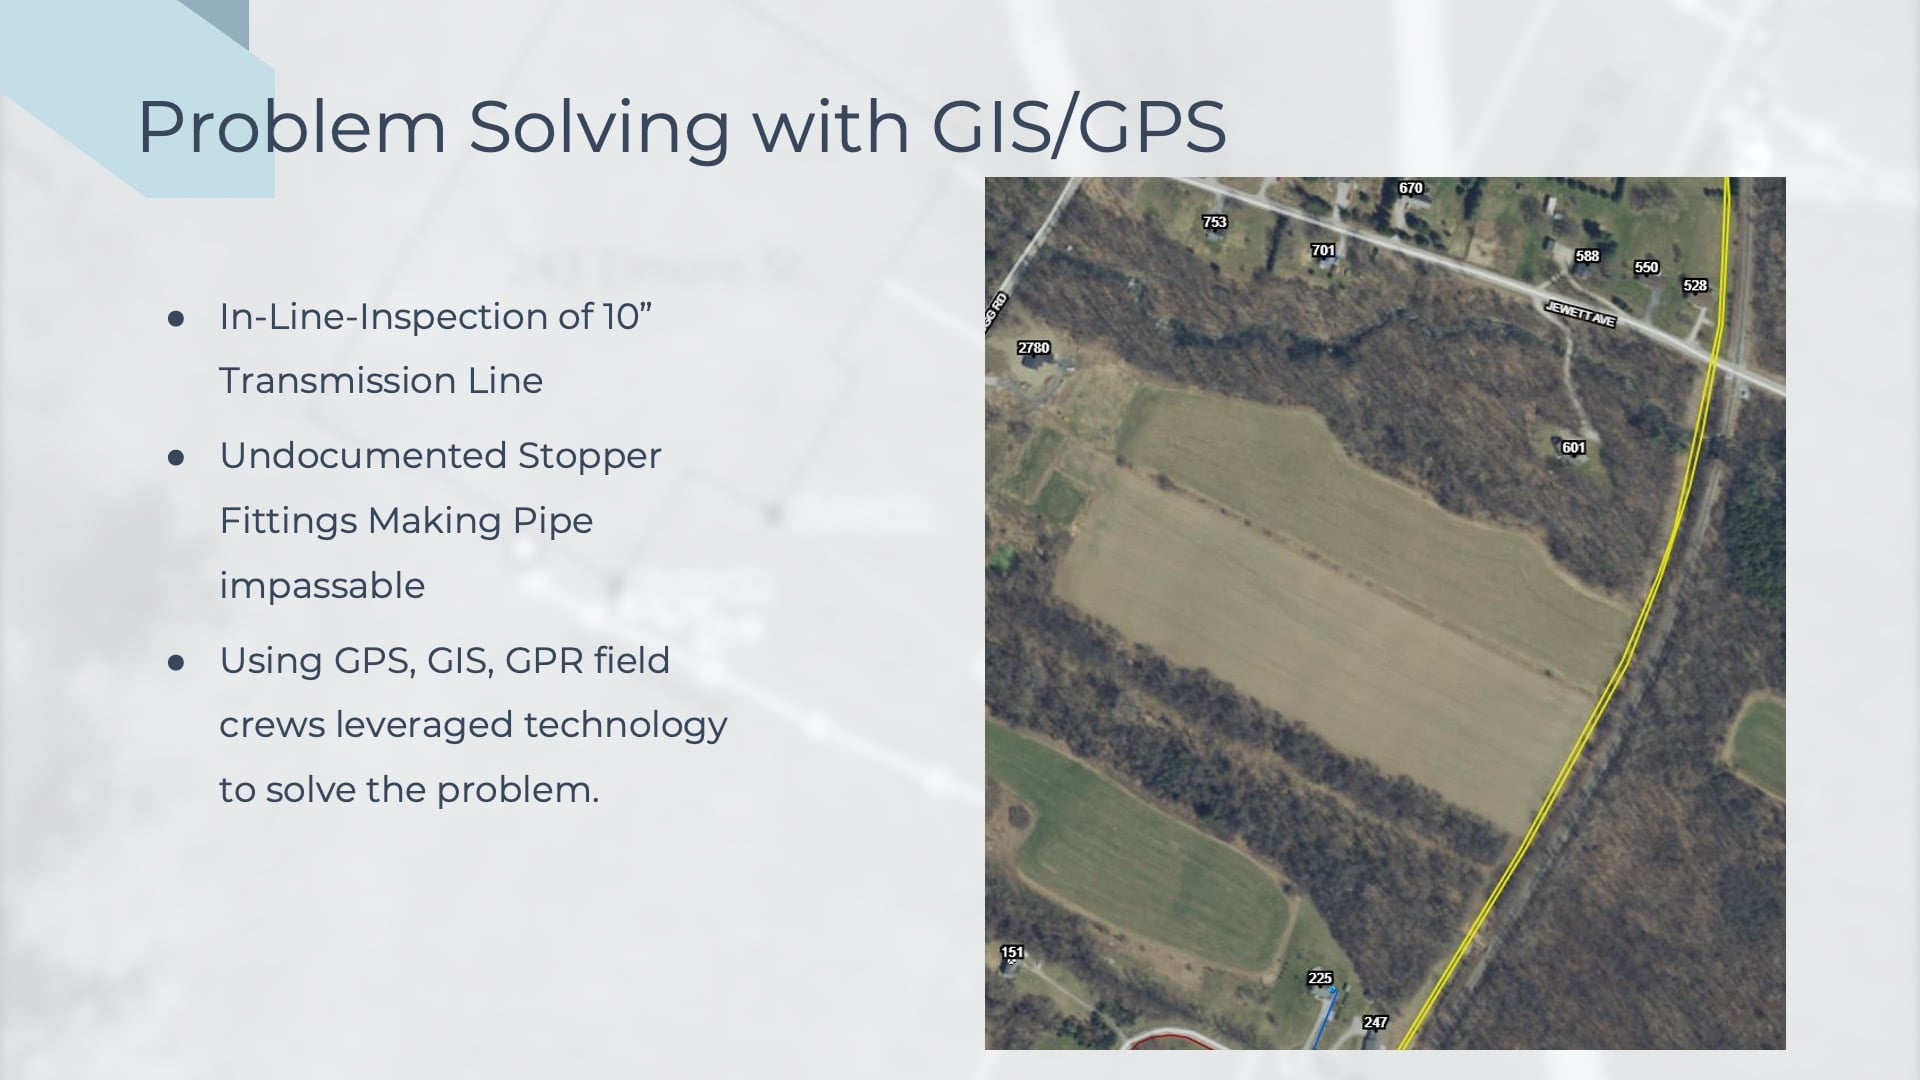 In the first slide of "Problem Solving with GIS/GPS," an overhead image of a field is displayed on the right of the slide. There are no distringuisable features on the overhead image, but Vermont Gas needed to locate decades-old assets in the field.